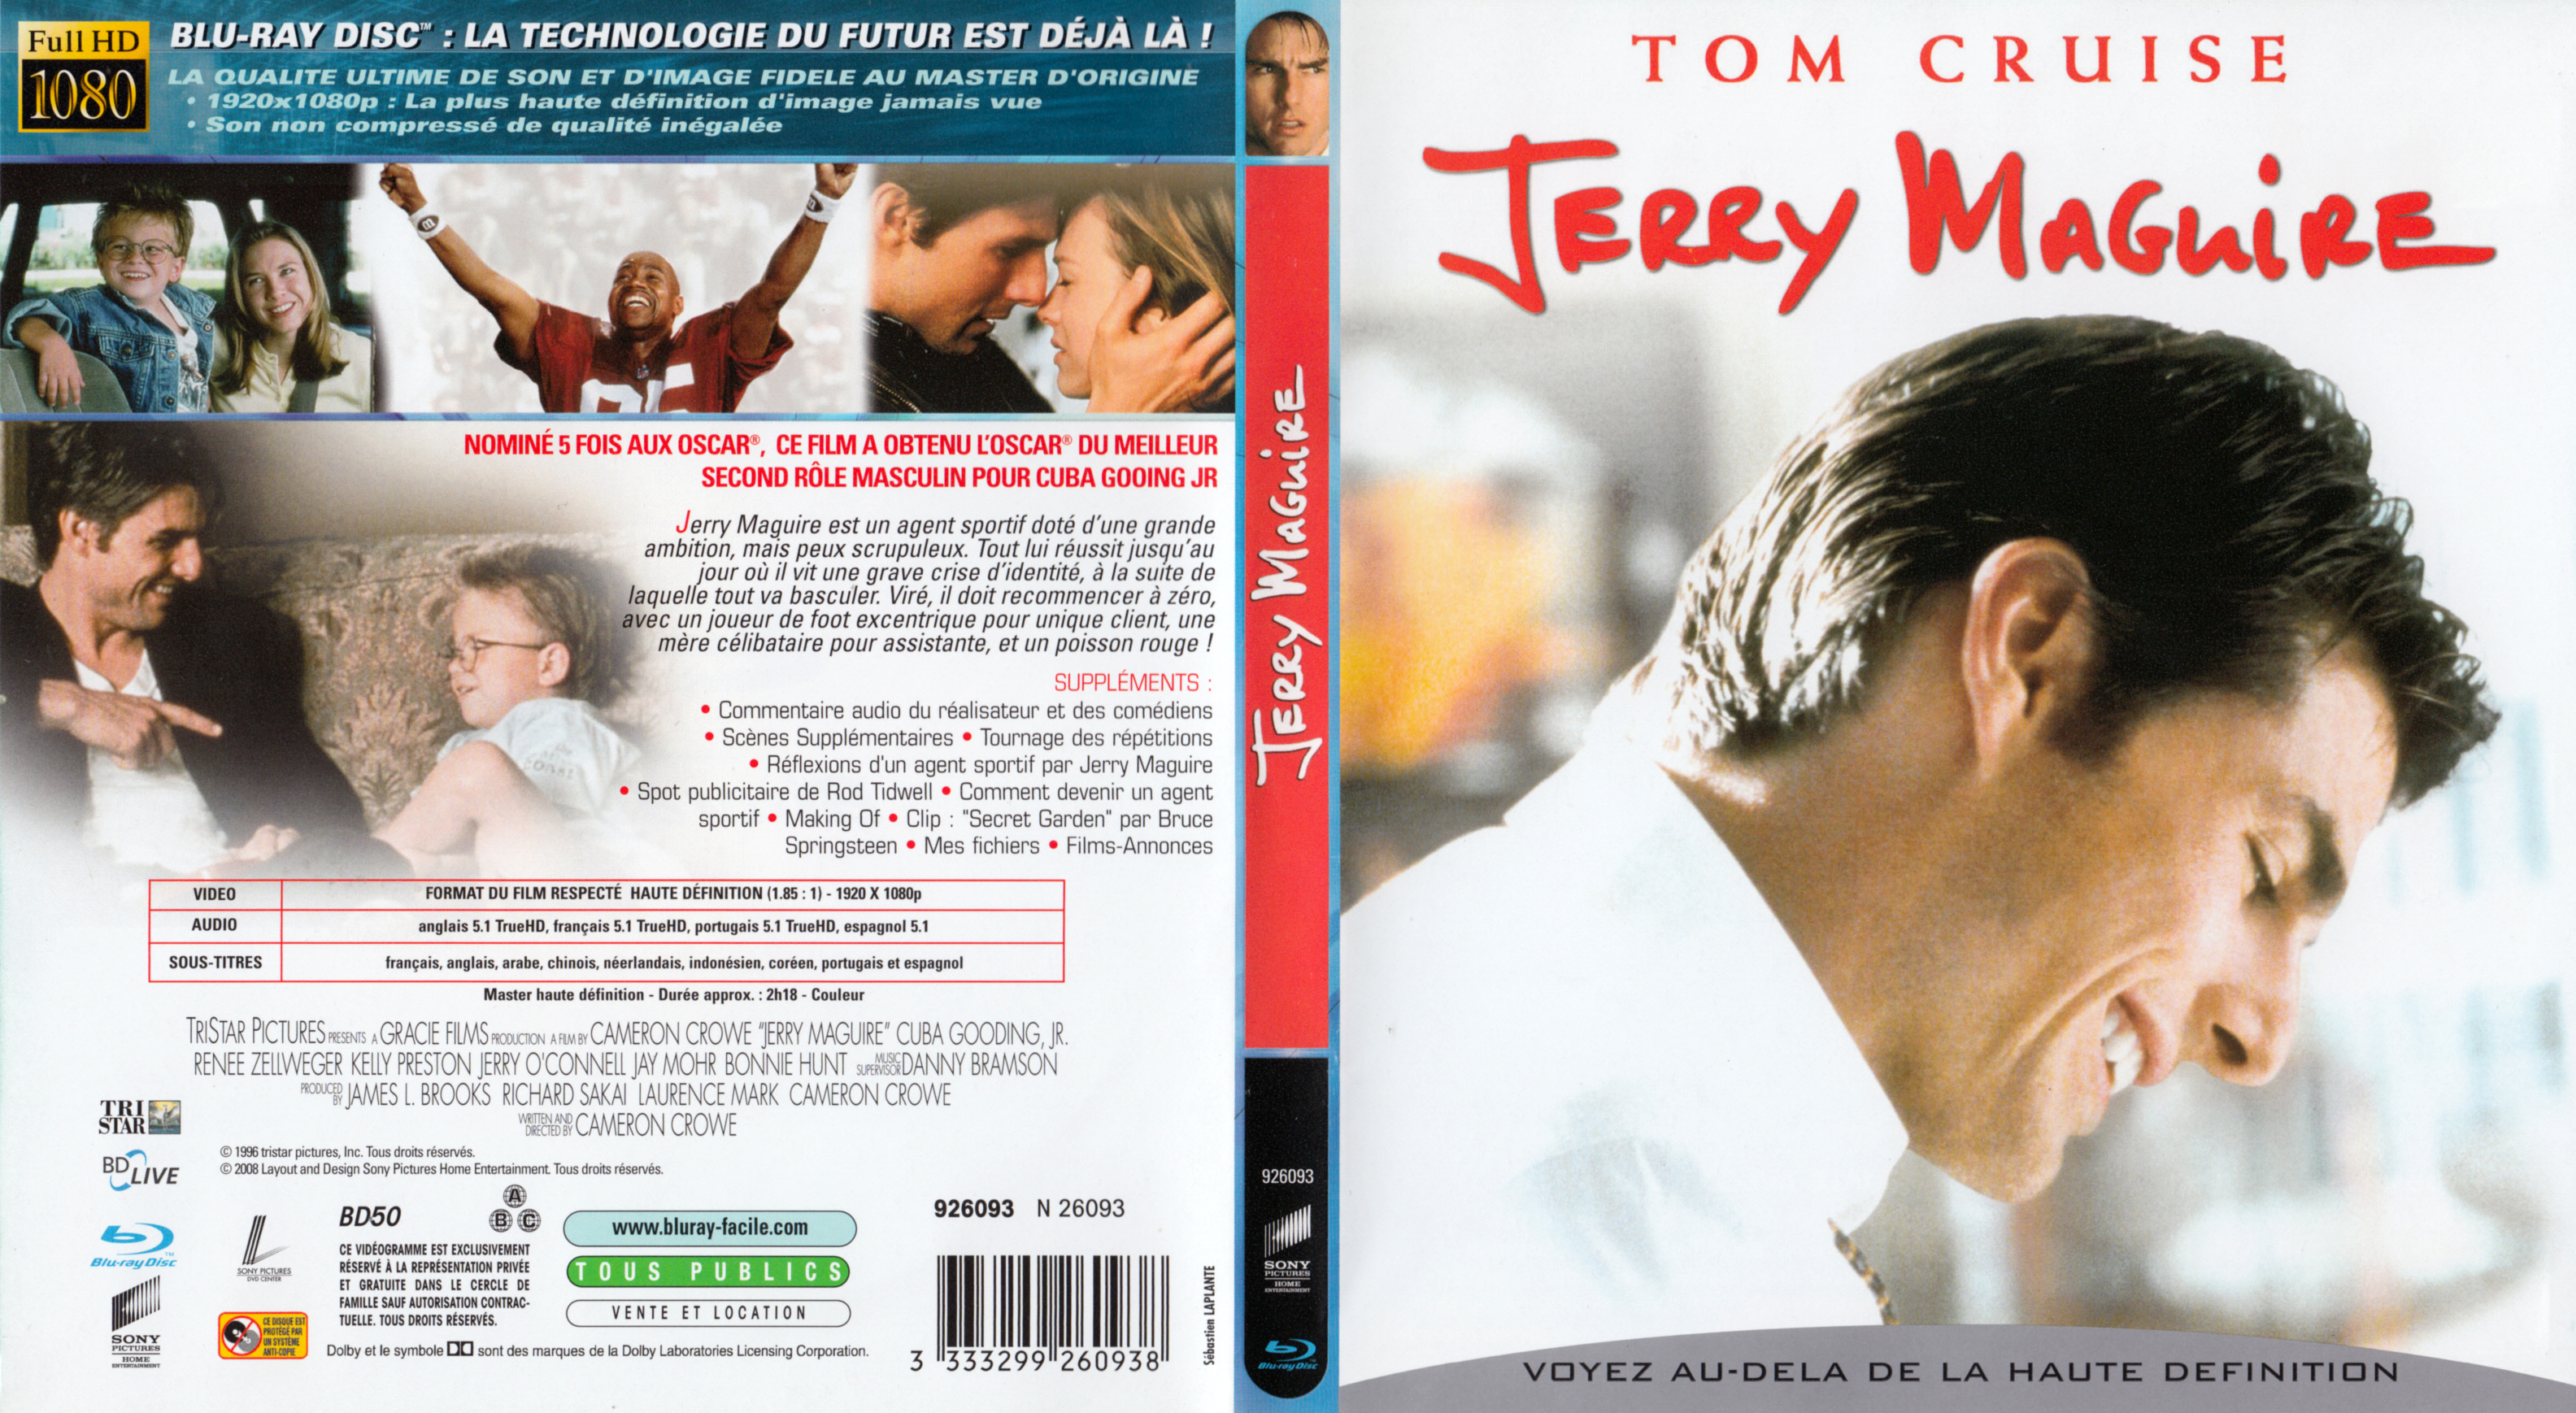 Jaquette DVD Jerry Maguire (BLU-RAY)